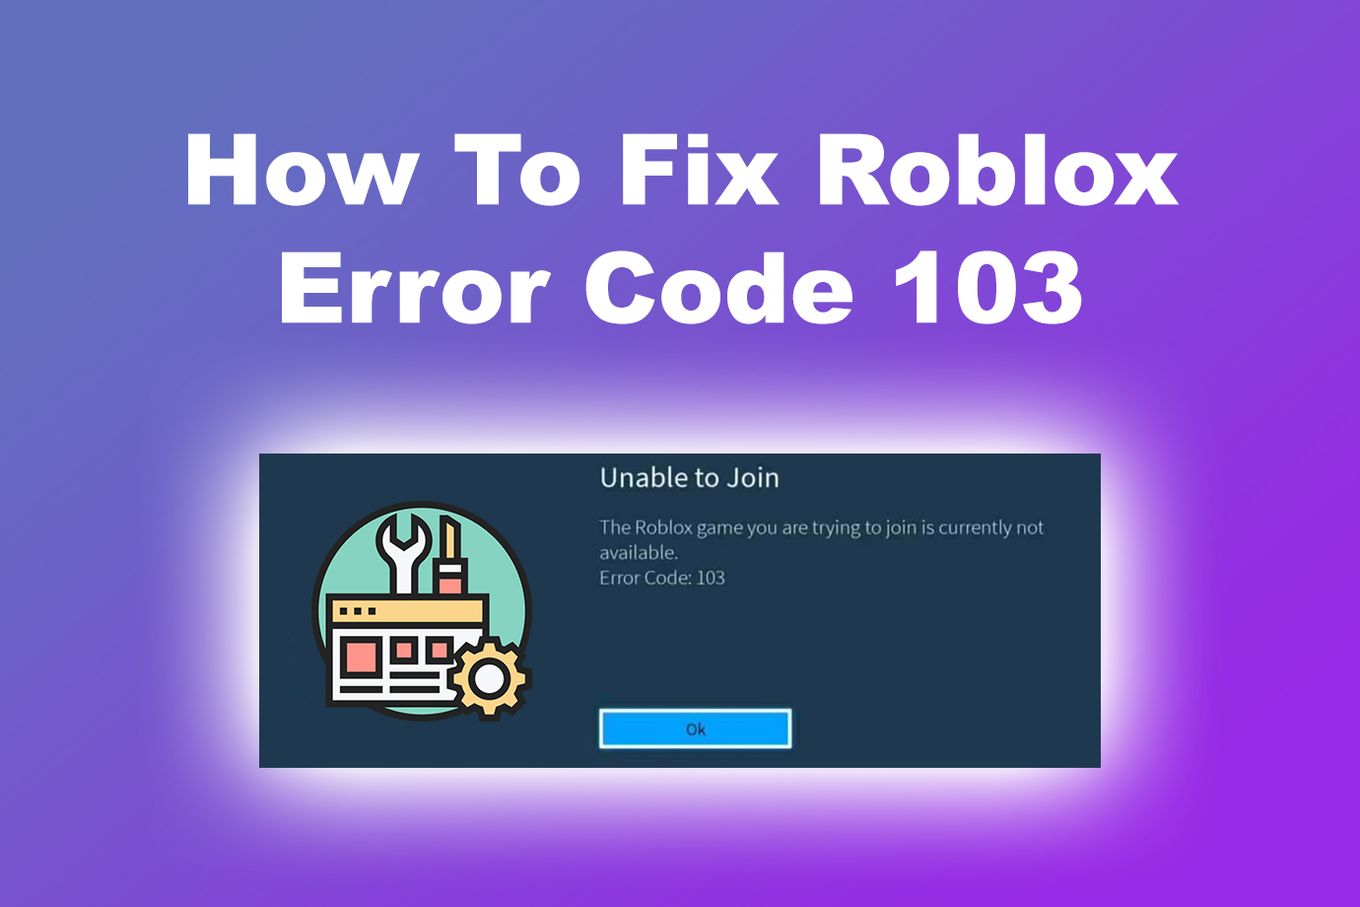 7 Ways to Fix Roblox Error 503 This Service Is Unavailable